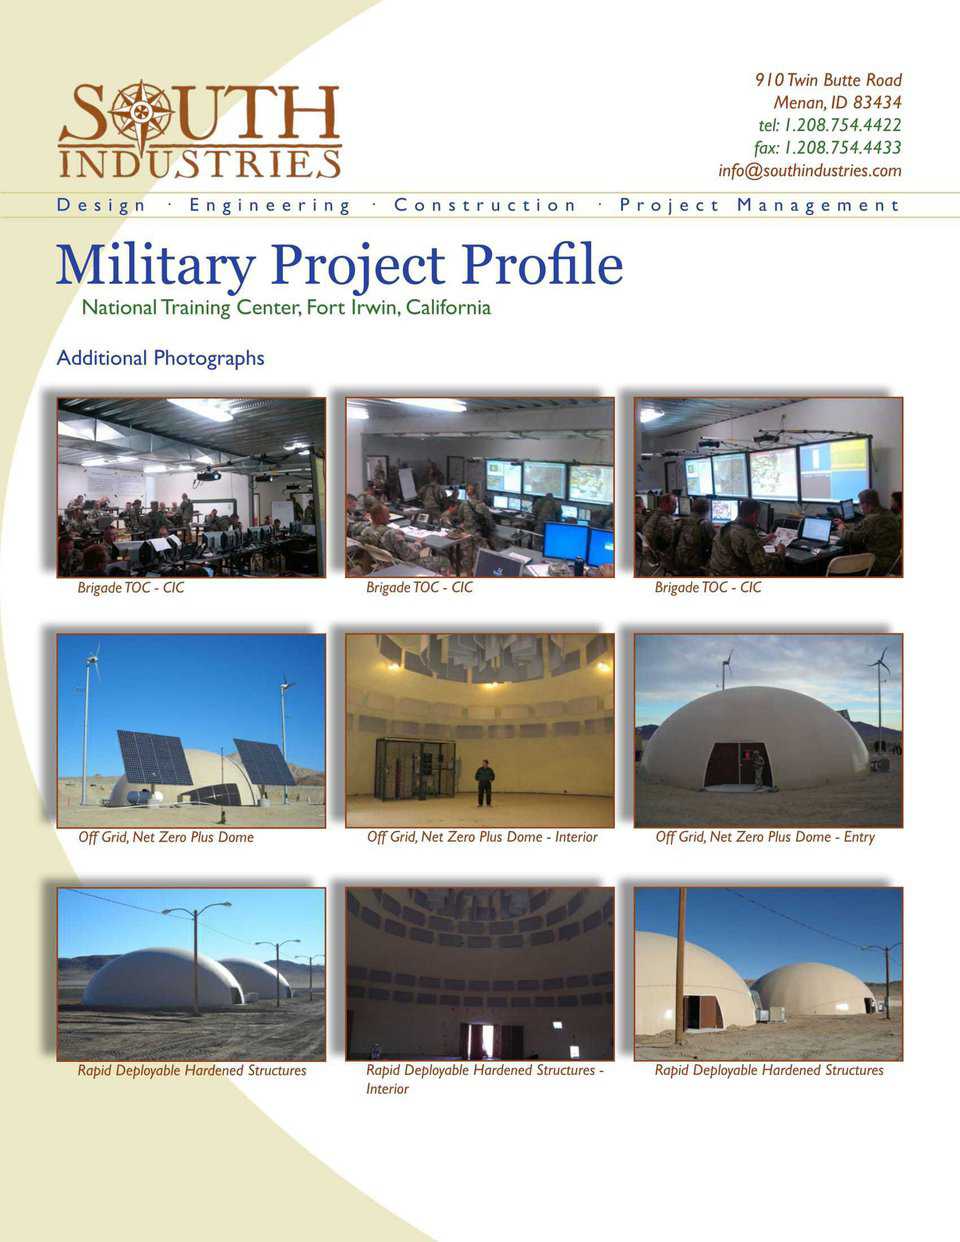 More pictures of the military dome project.